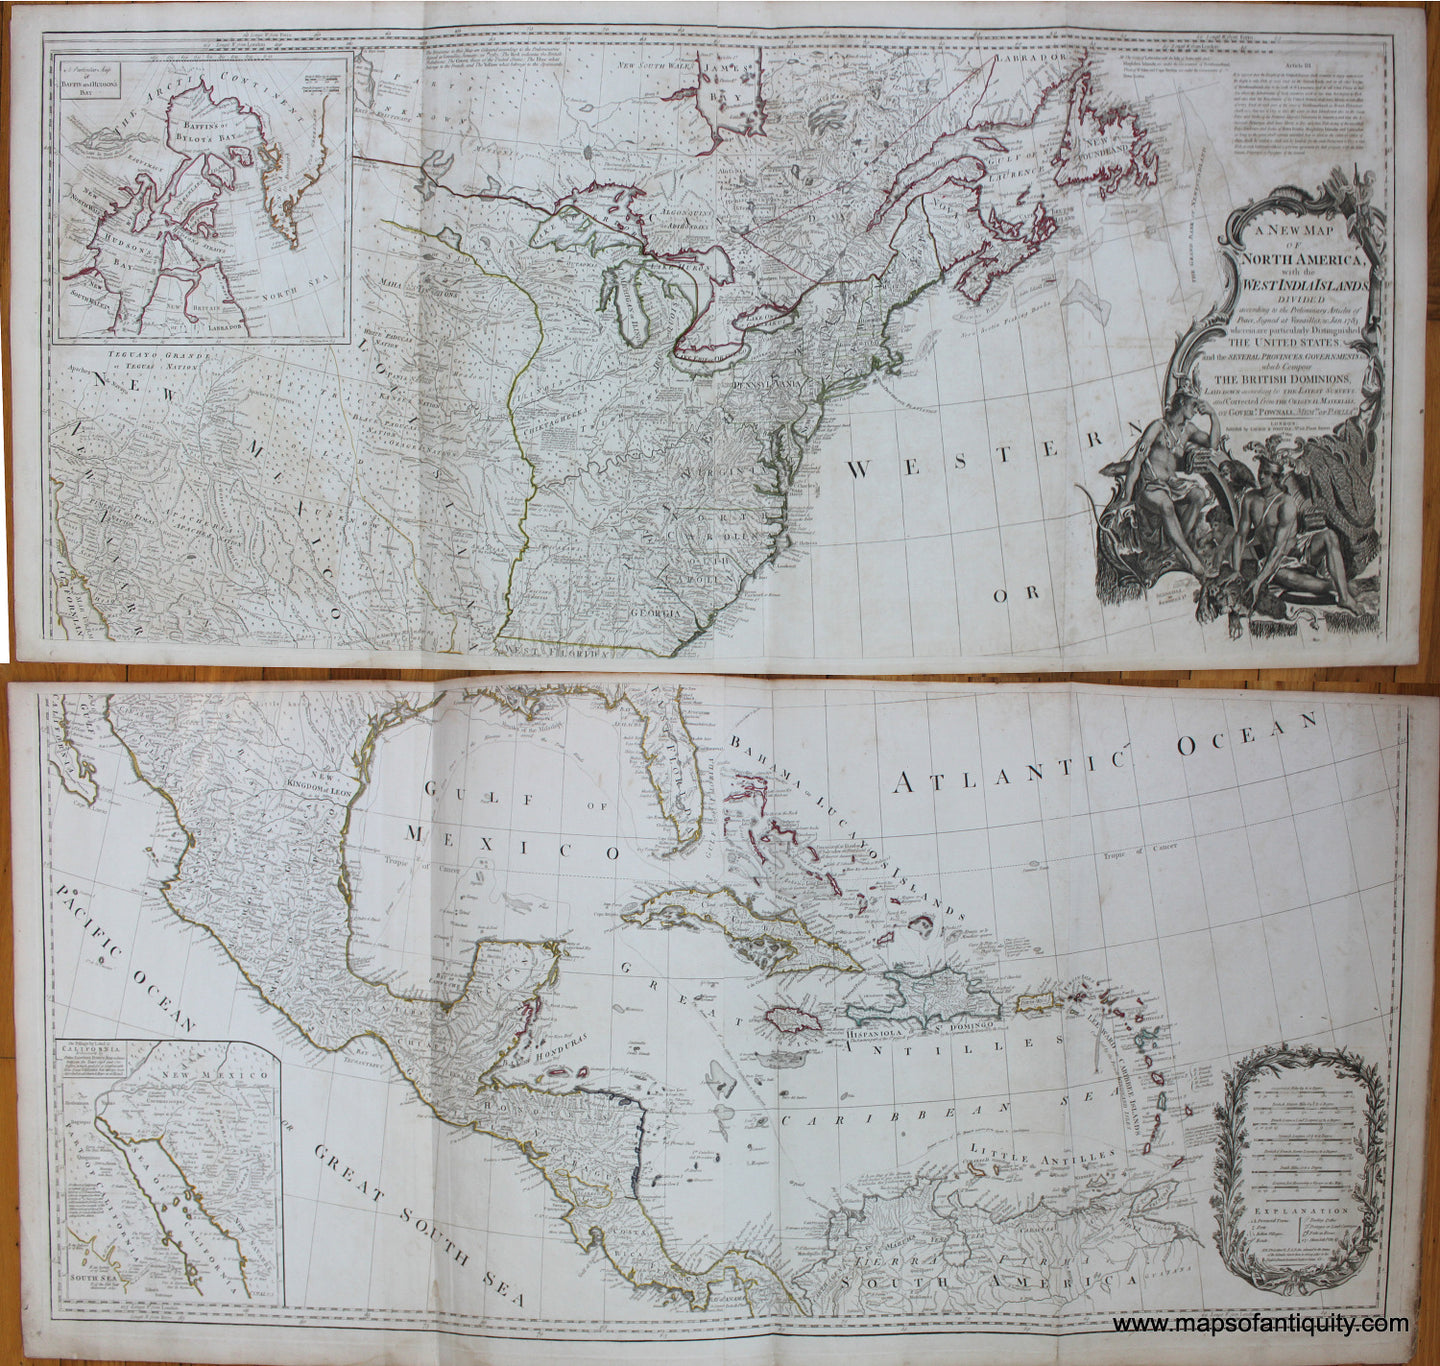 Antique-Hand-Colored-Map-A-New-Map-of-North-America-with-the-West-India-Islands-**********-North-America--1794-Laurie-&-Whittle-Maps-Of-Antiquity